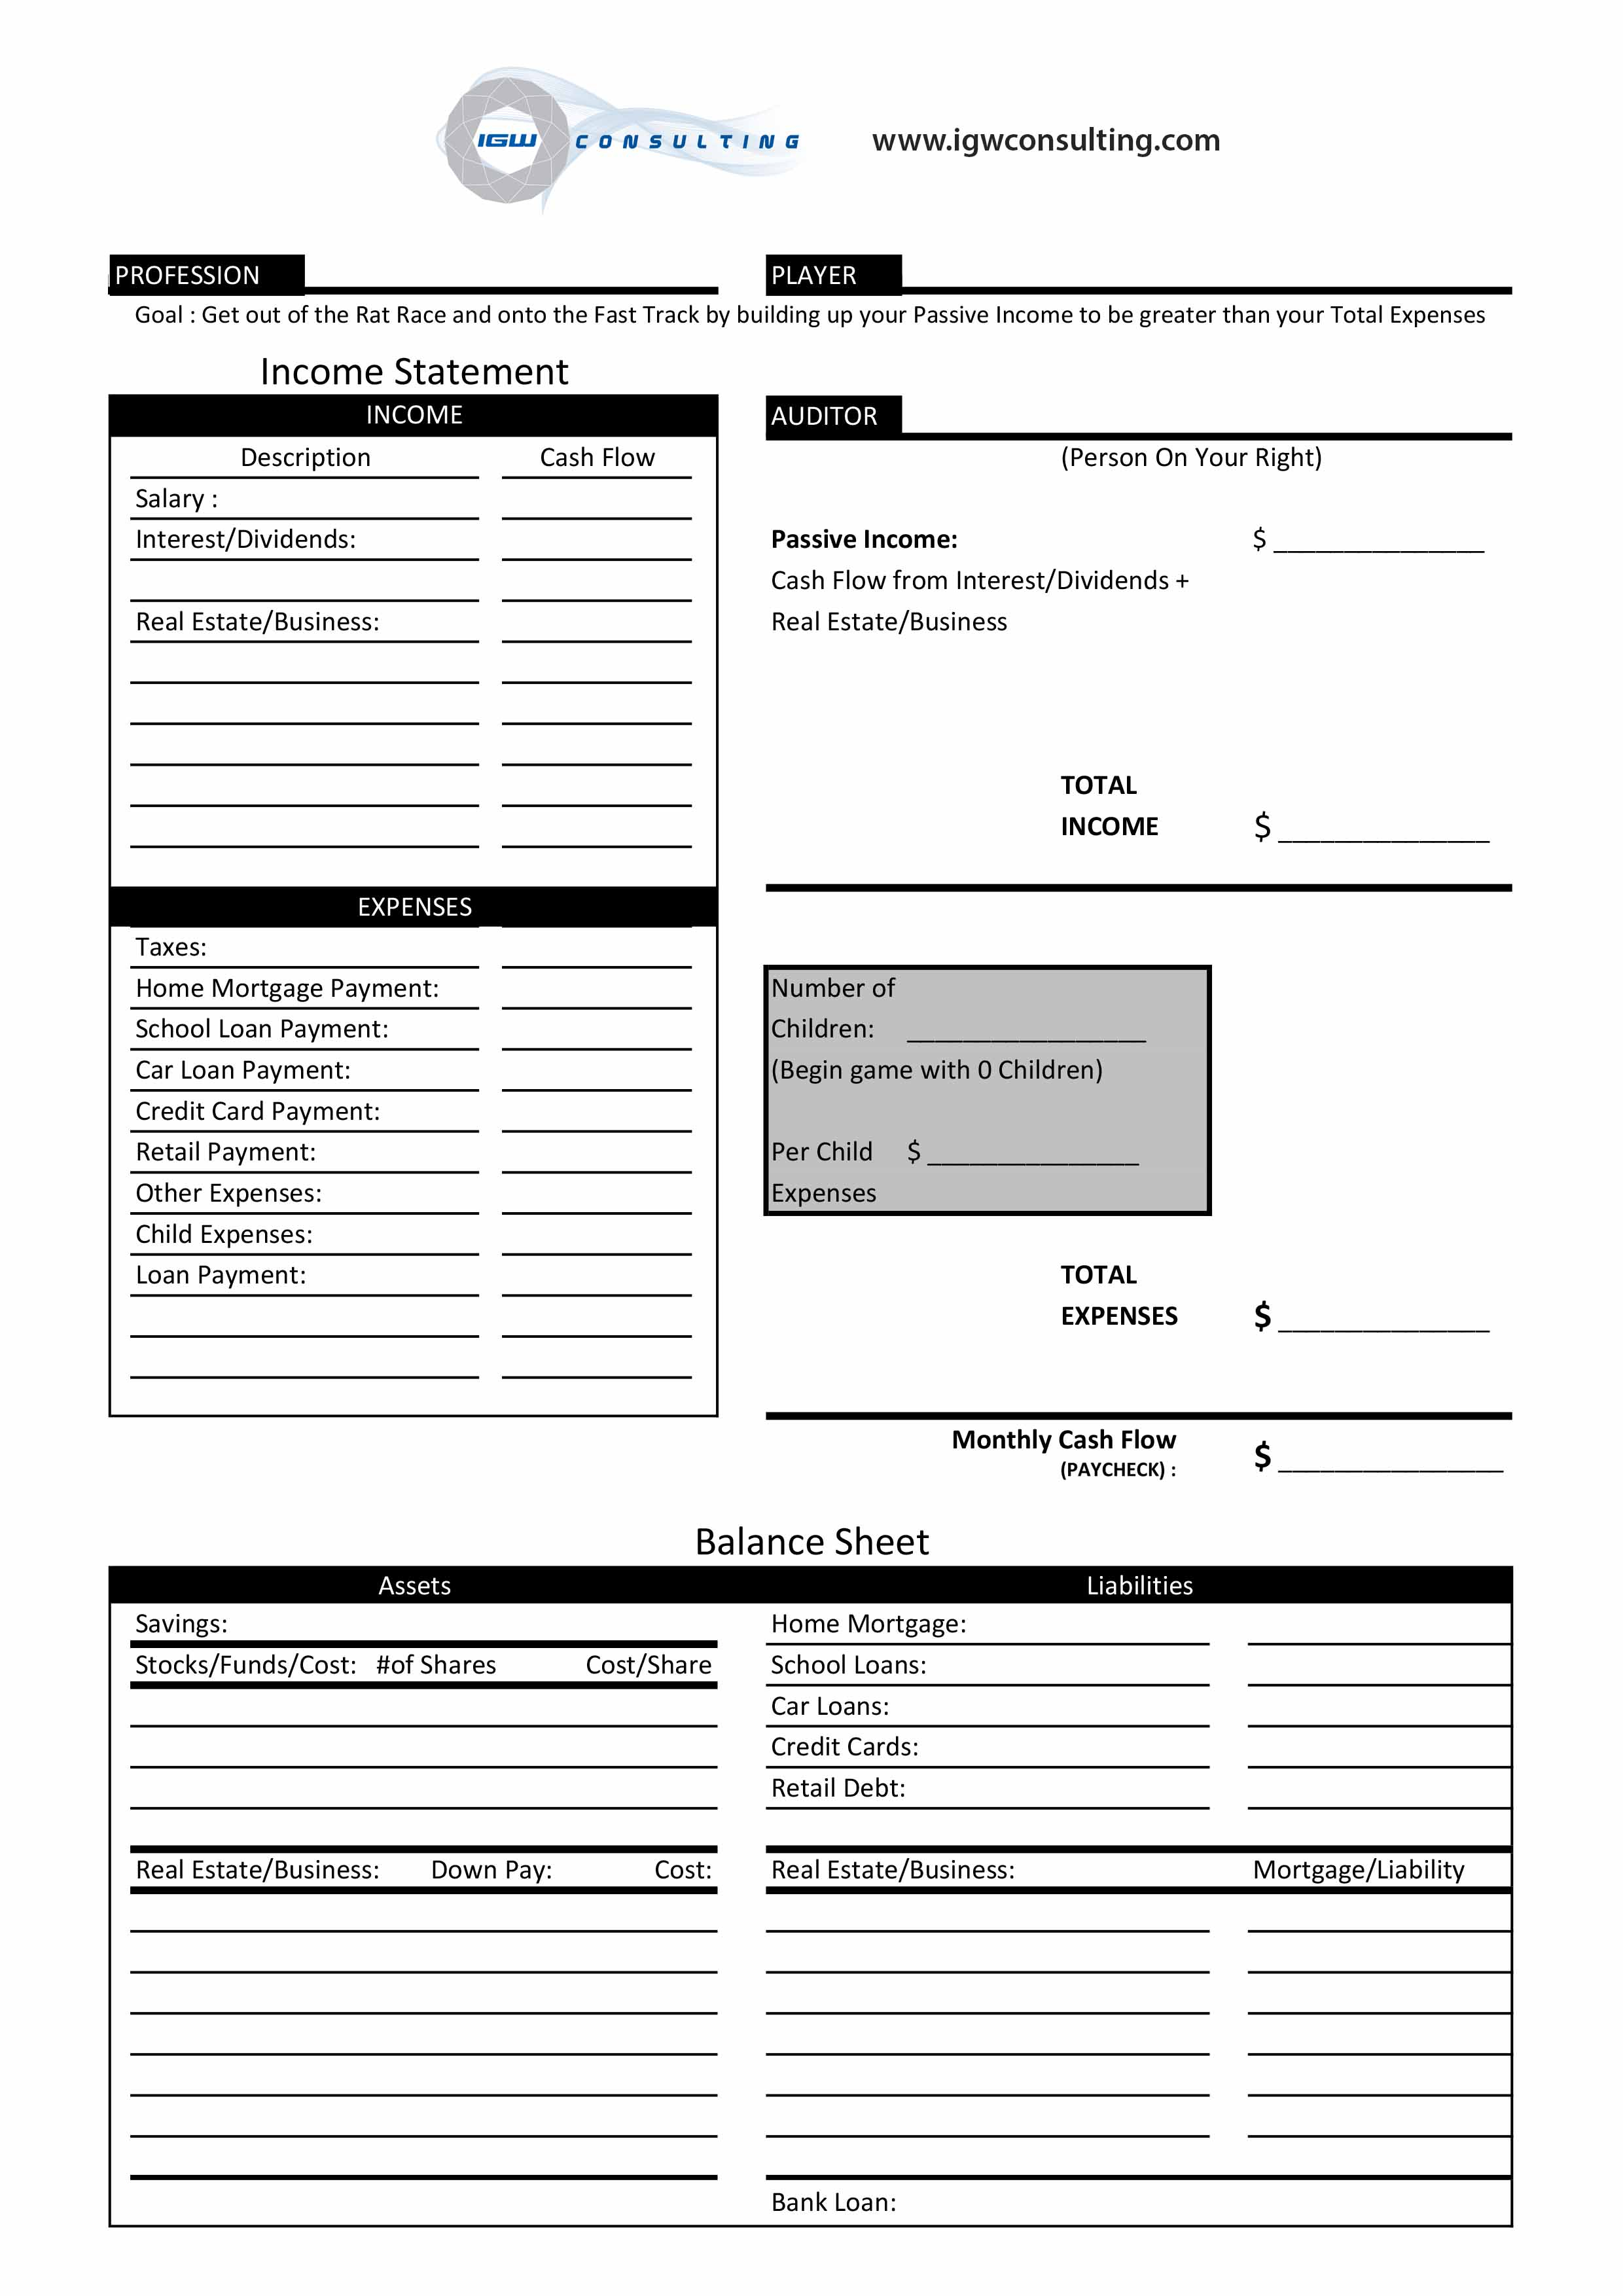 Cash Flow Spreadsheet Download Pertaining To Download  Igw Consulting